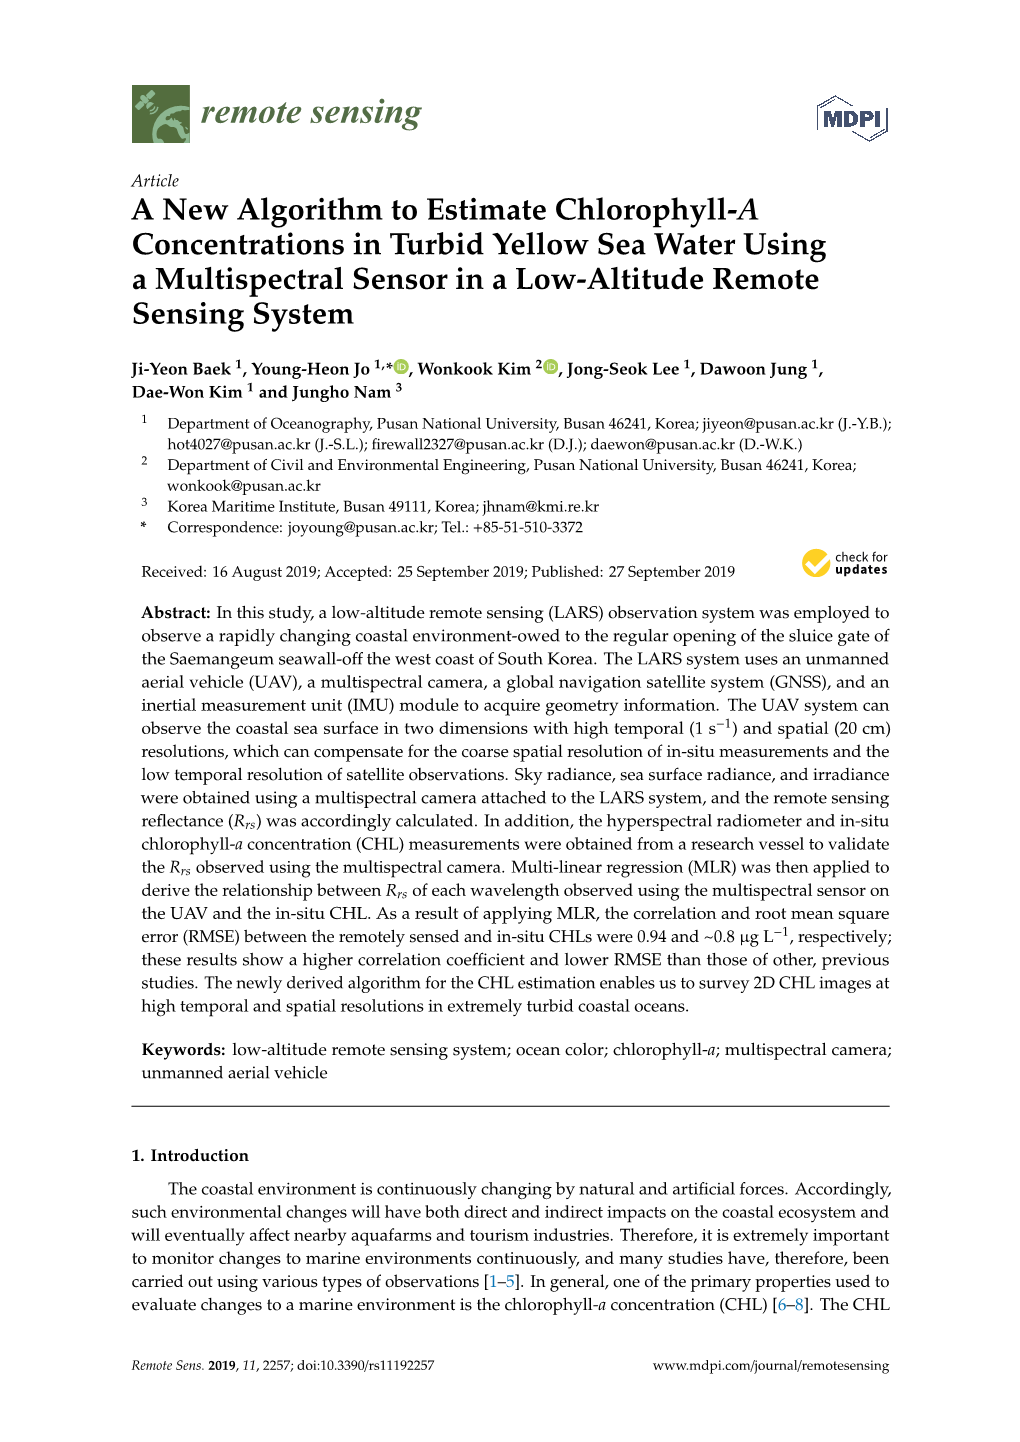 A New Algorithm to Estimate Chlorophyll-A Concentrations in Turbid Yellow Sea Water Using a Multispectral Sensor in a Low-Altitude Remote Sensing System